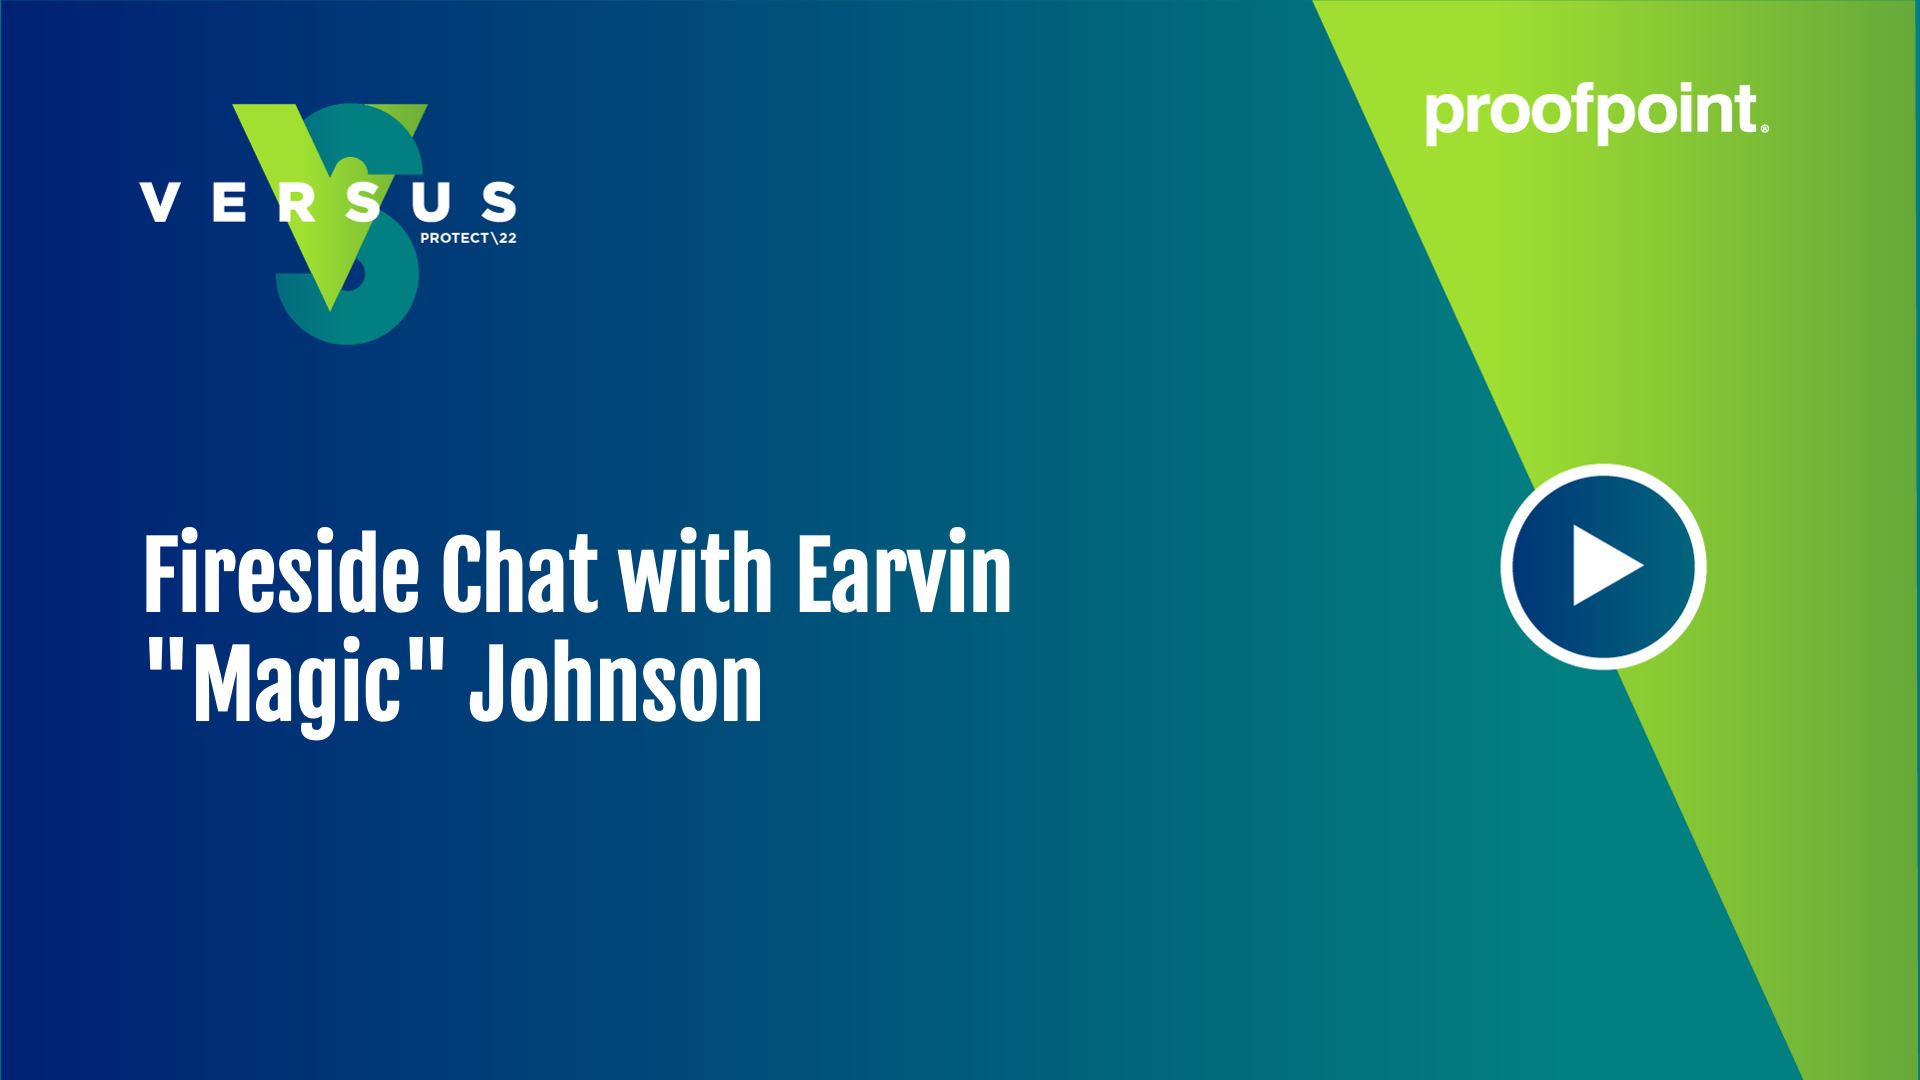 Fireside Chat with Earvin "Magic" Johnson